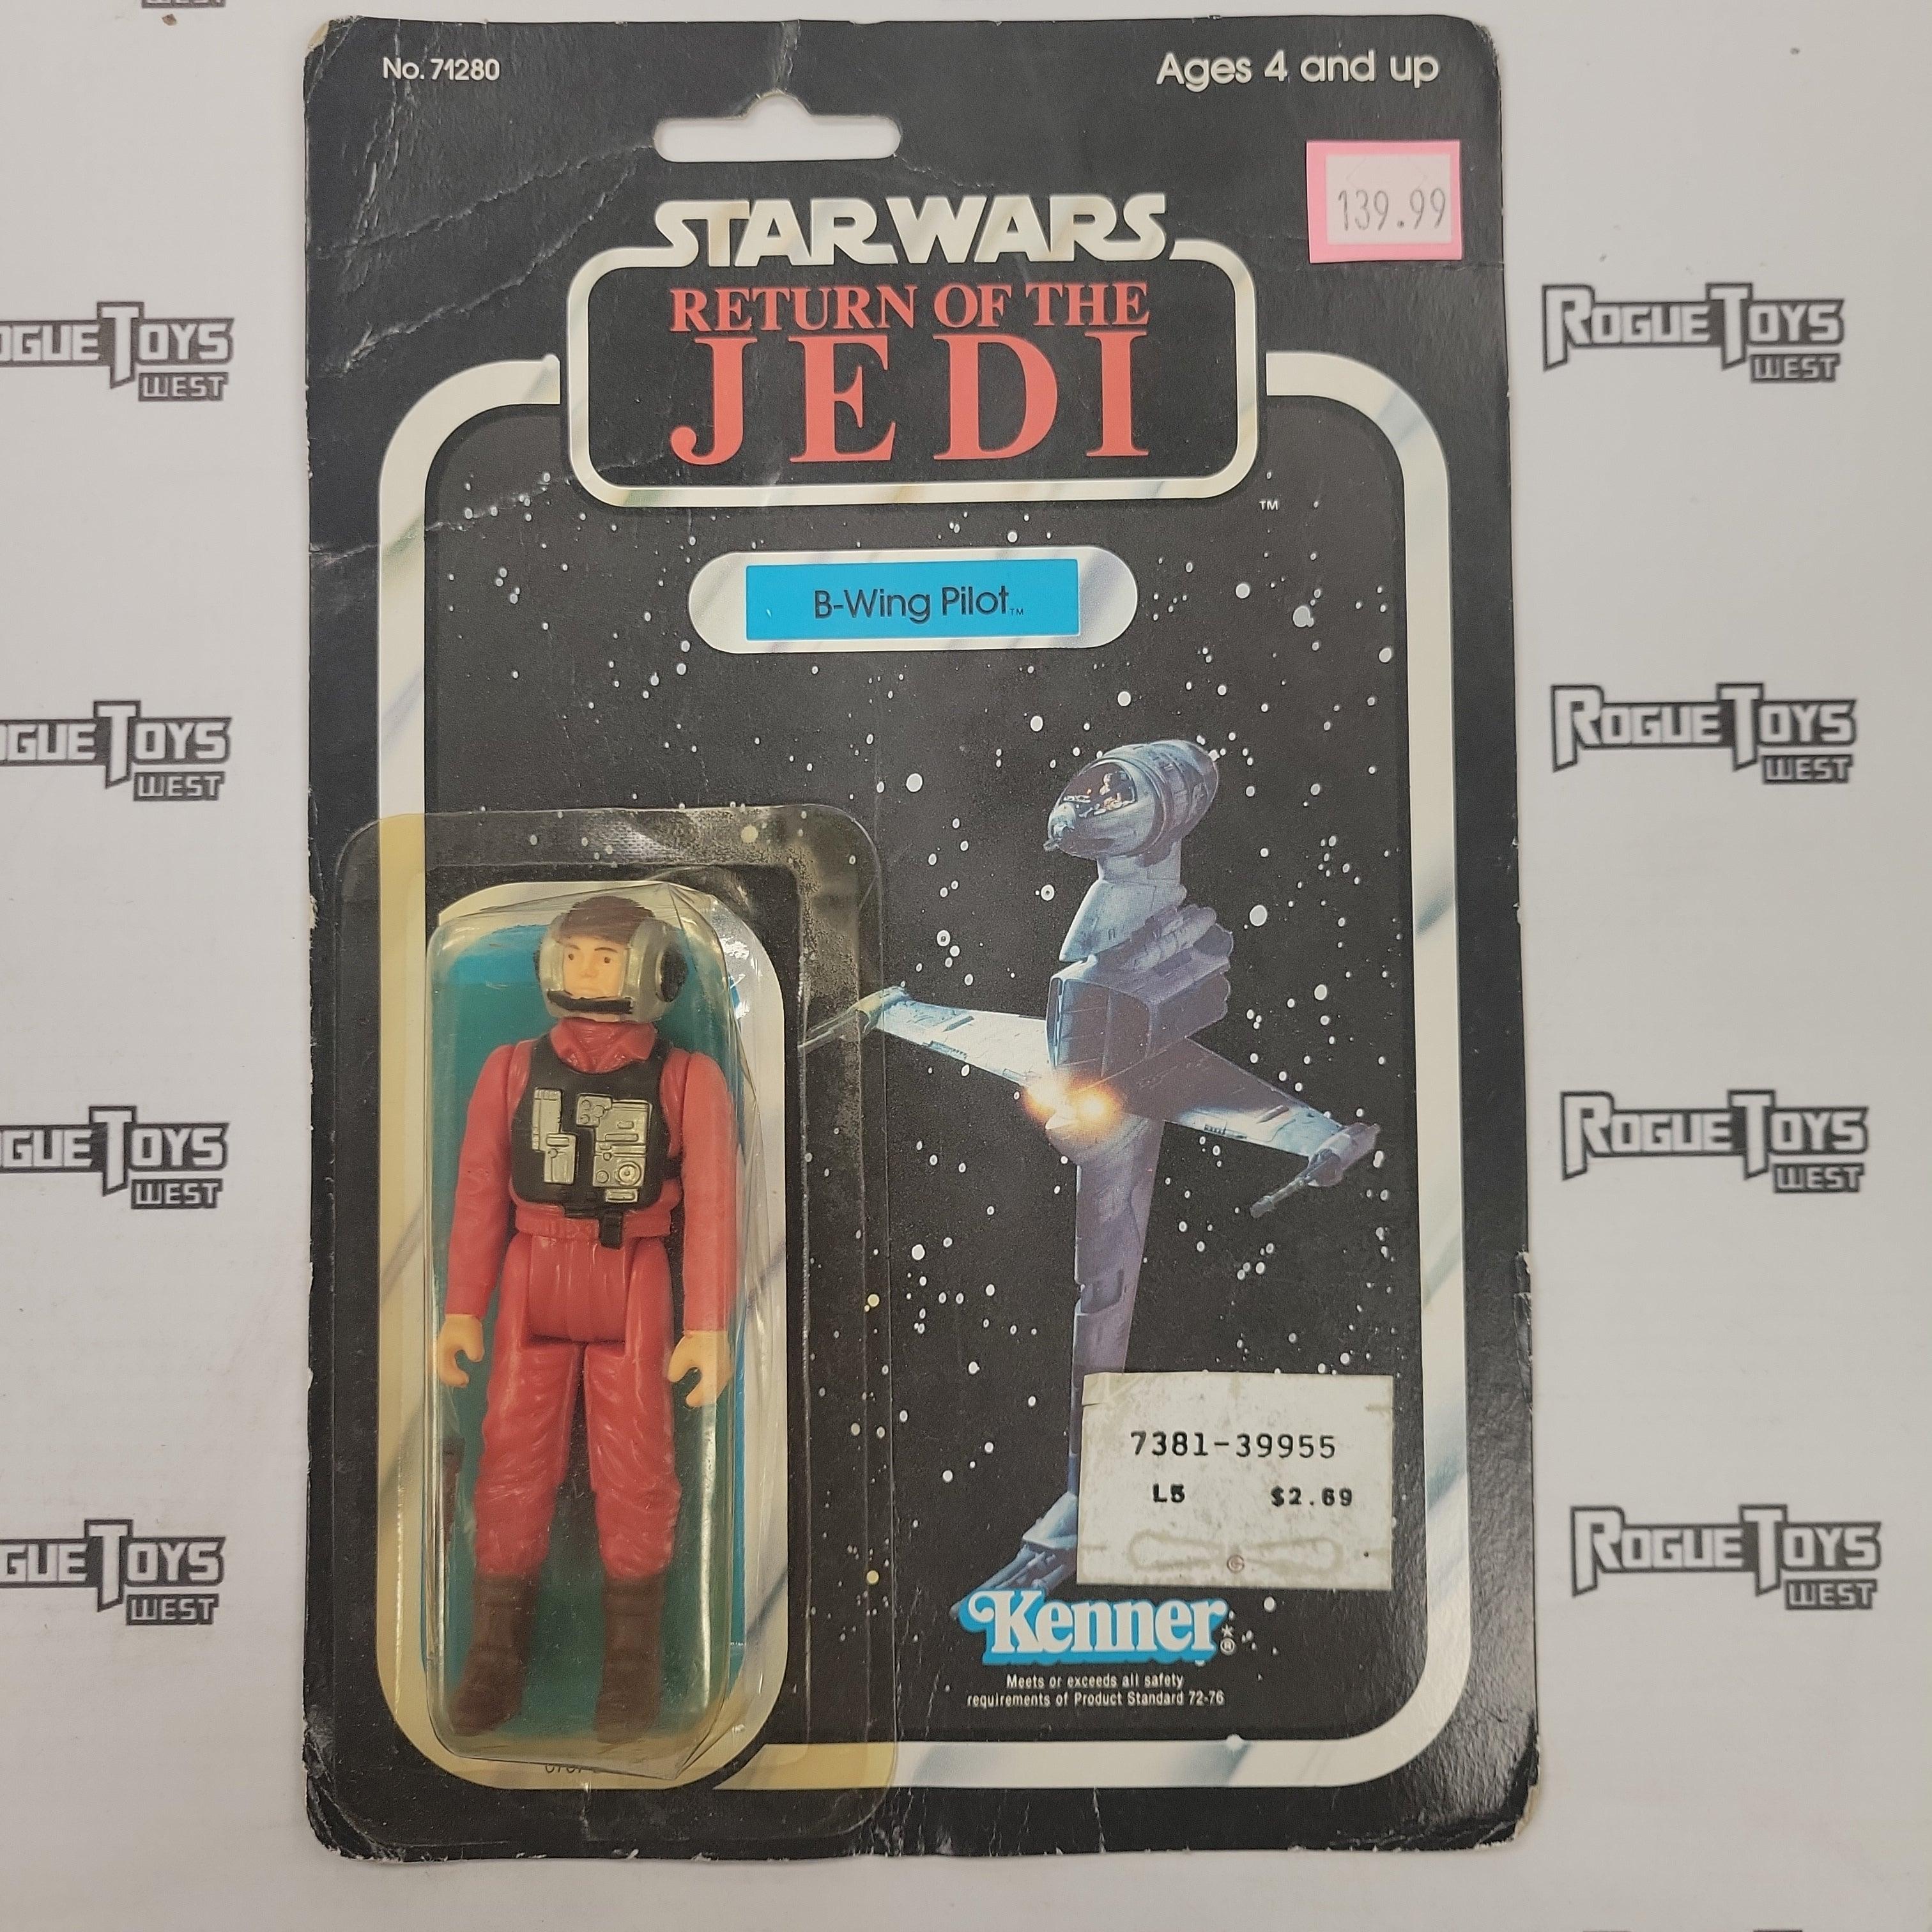 KENNER (1983) Star Wars: Return of the Jedi, B-Wing Pilot - Rogue Toys